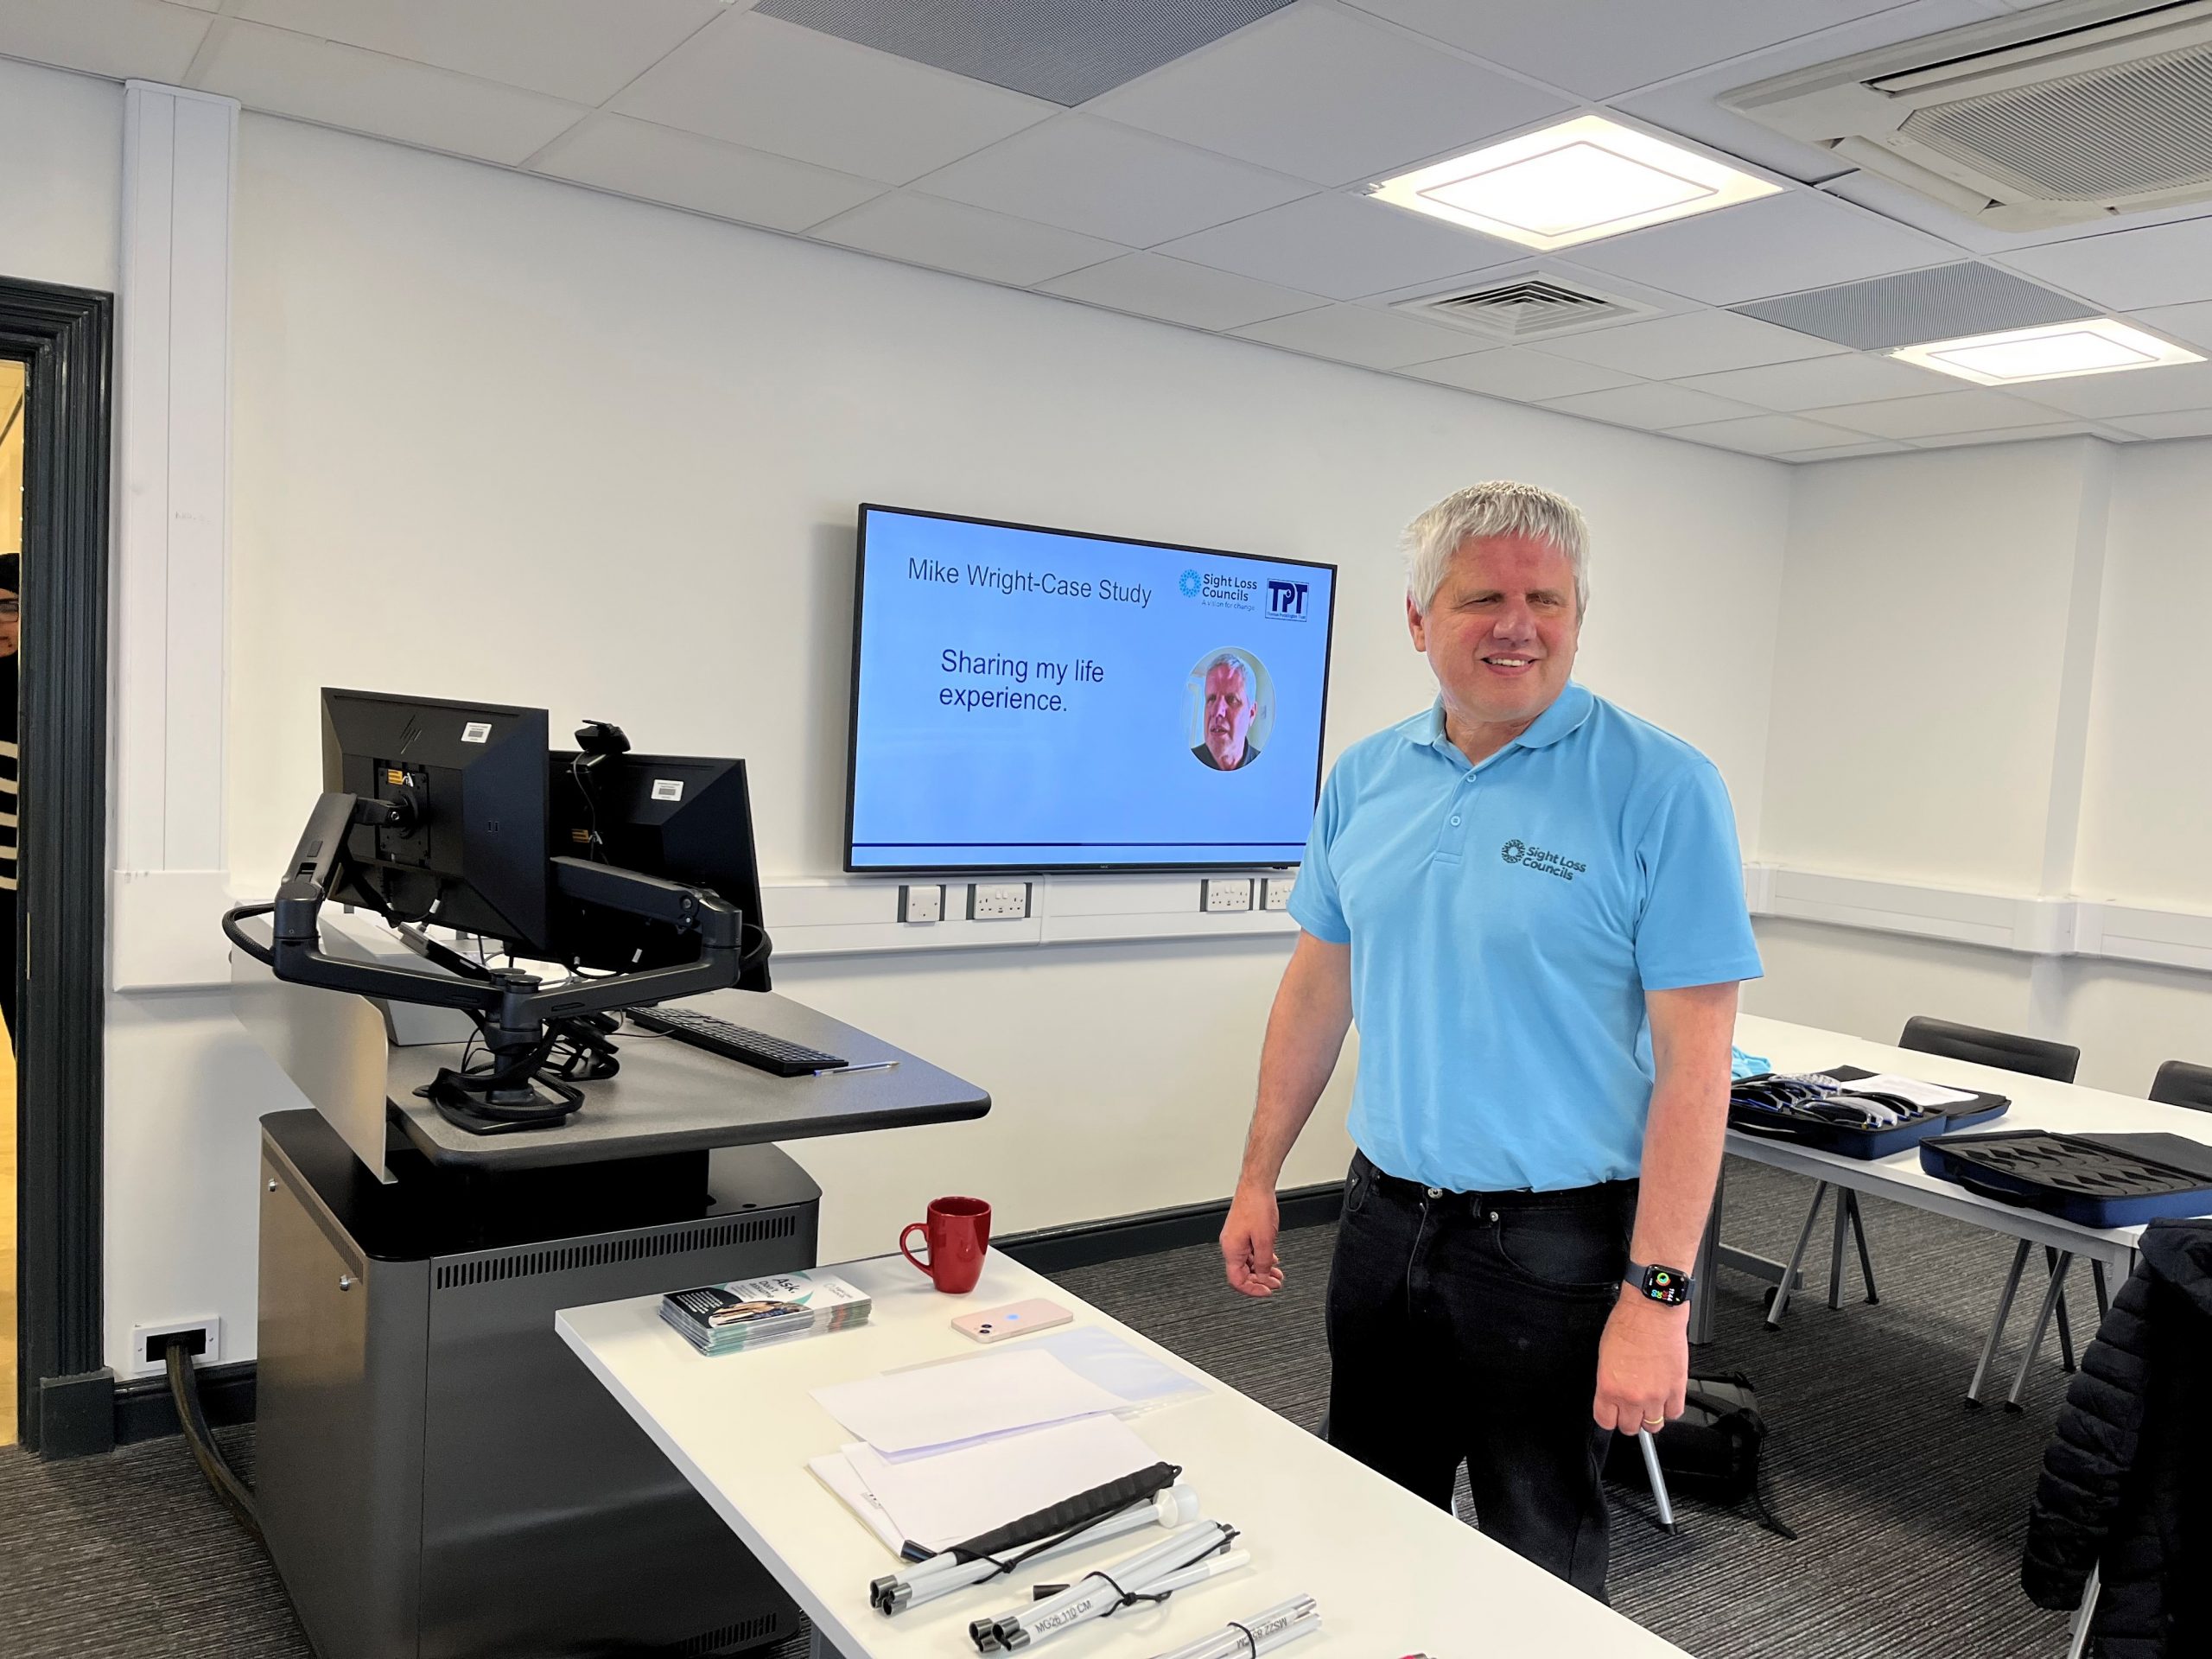 Mike Wright, Merseyside SLC volunteer, standing behind a table during his presentation in a classroom. His head is turned to the side and he is smiling. He is wearing a pale blue Sight Loss Council t-shirt, and in the background is an overhead projector with his name and photo on it.